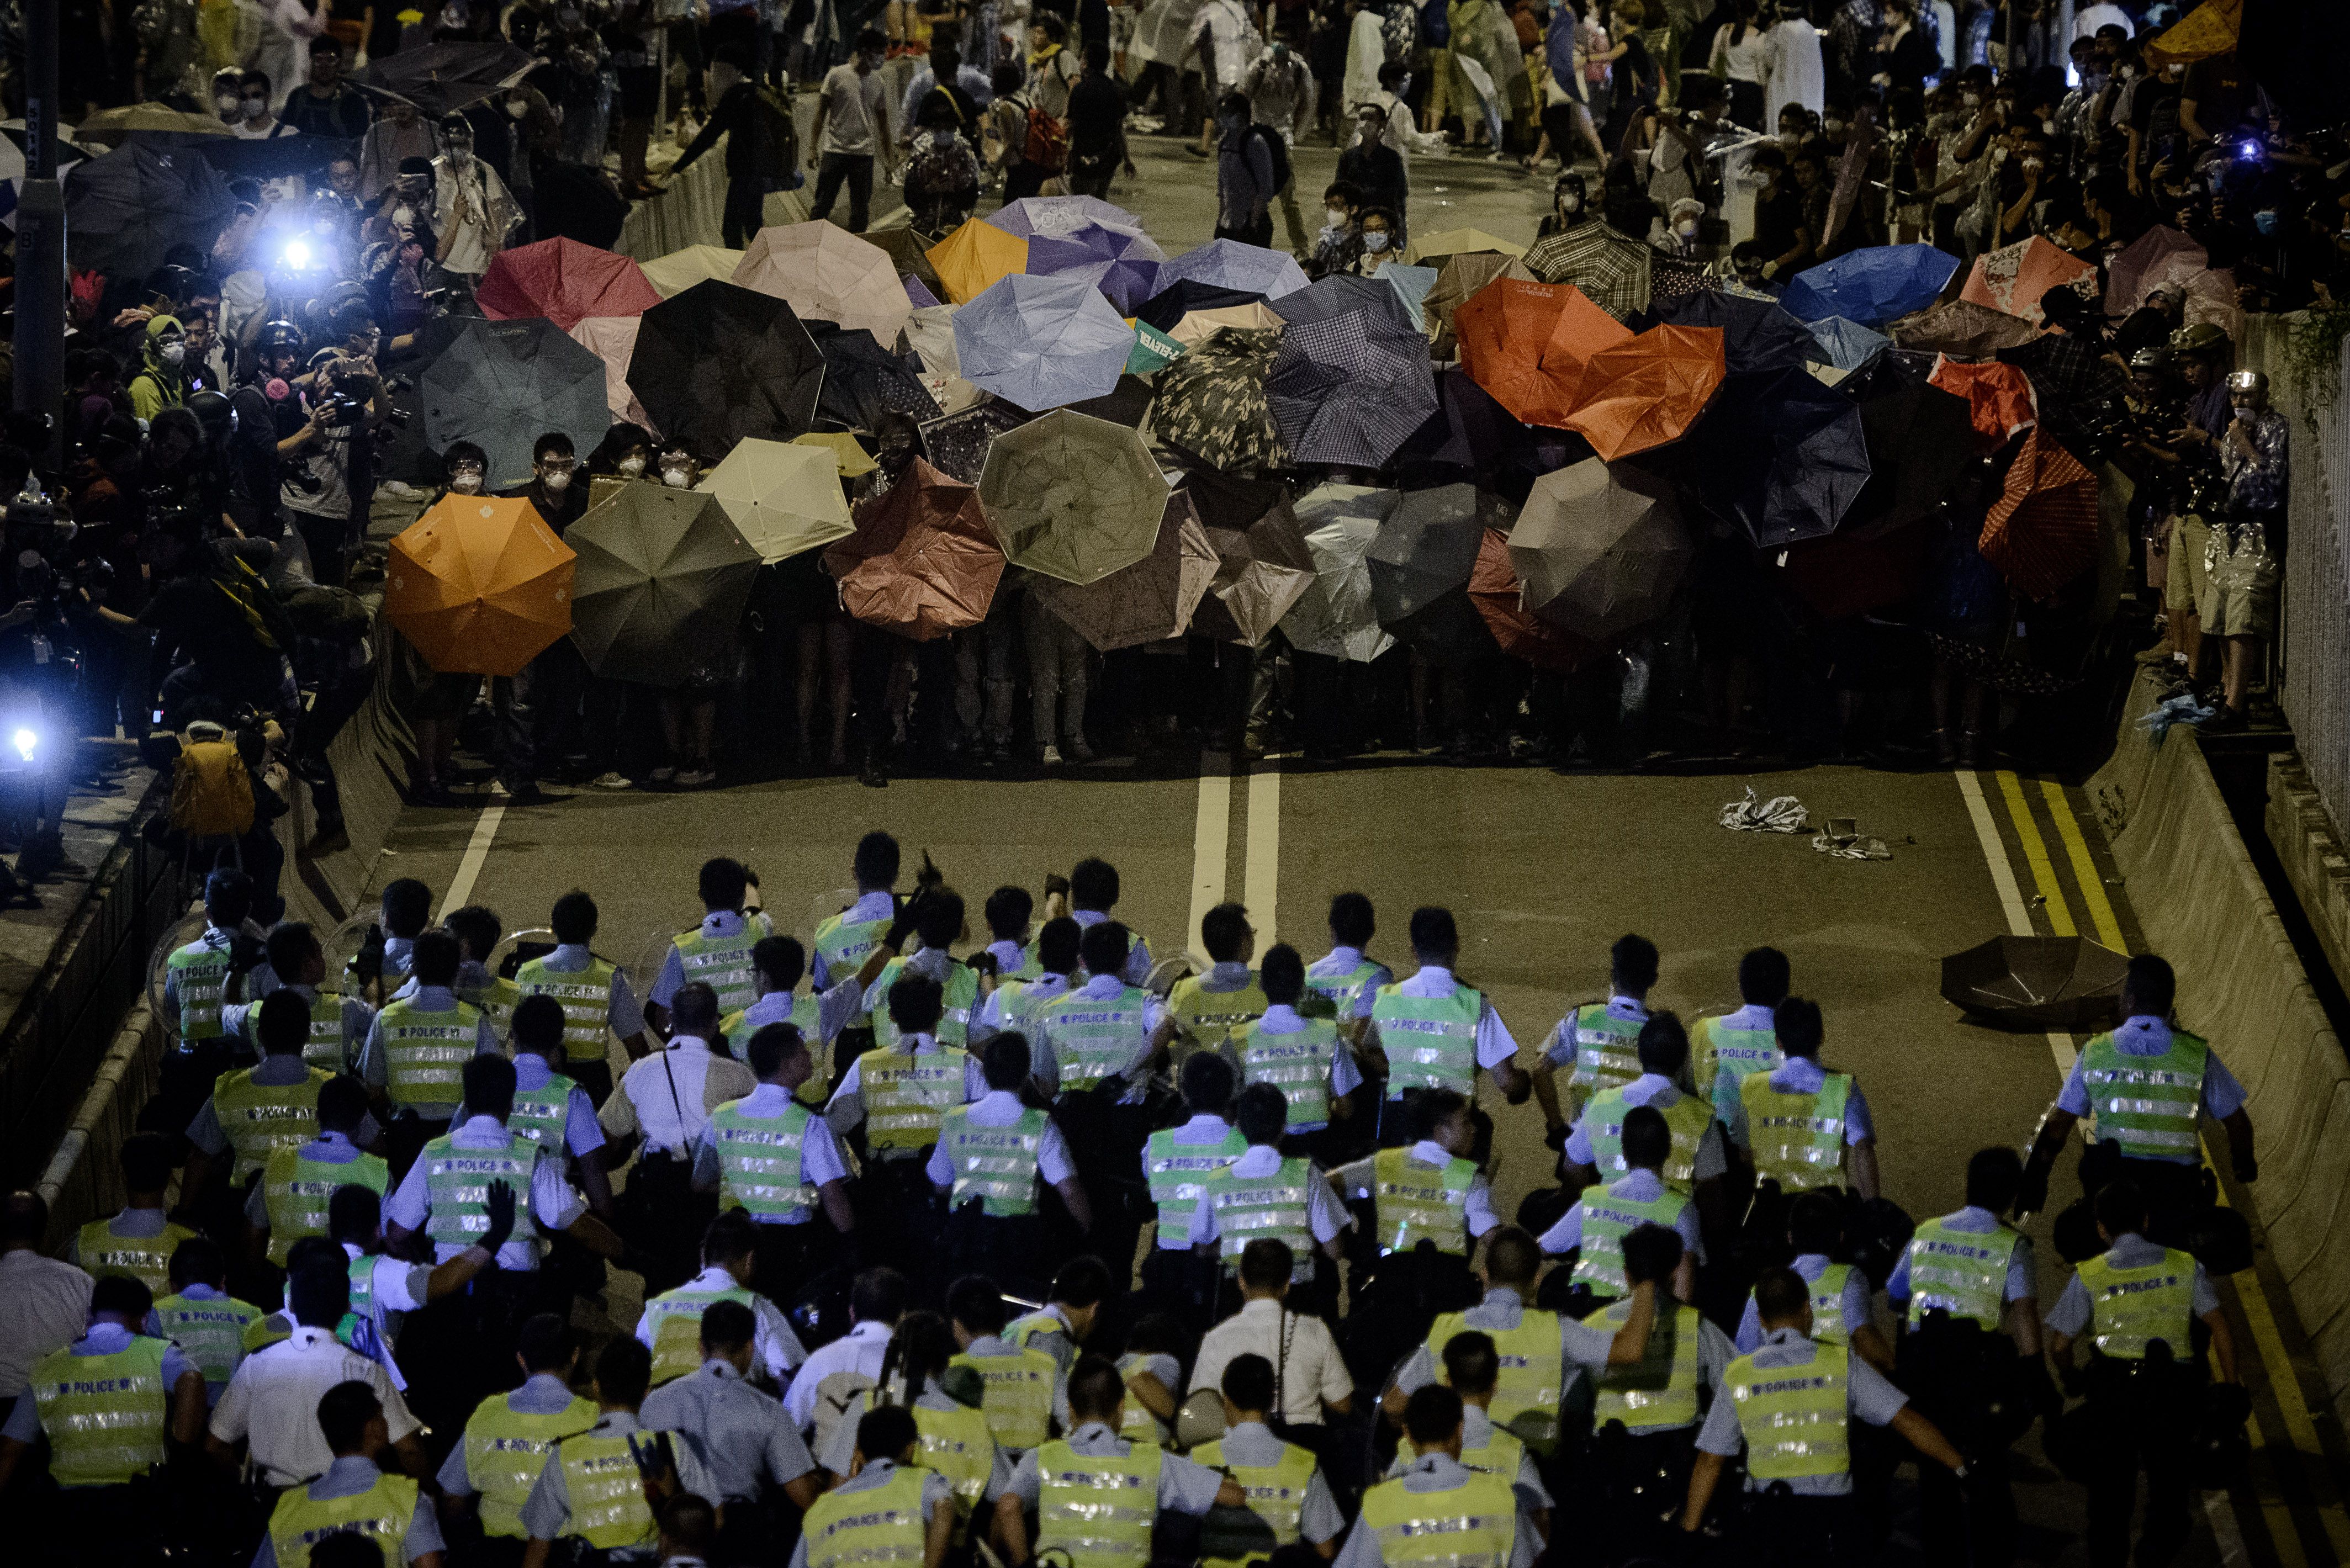 Police forces march toward pro-democracy protesters during a standoff outside the central government offices in Hong Kong on Oct. 14, 2014 (Philippe Lopez—AFP/Getty Images)